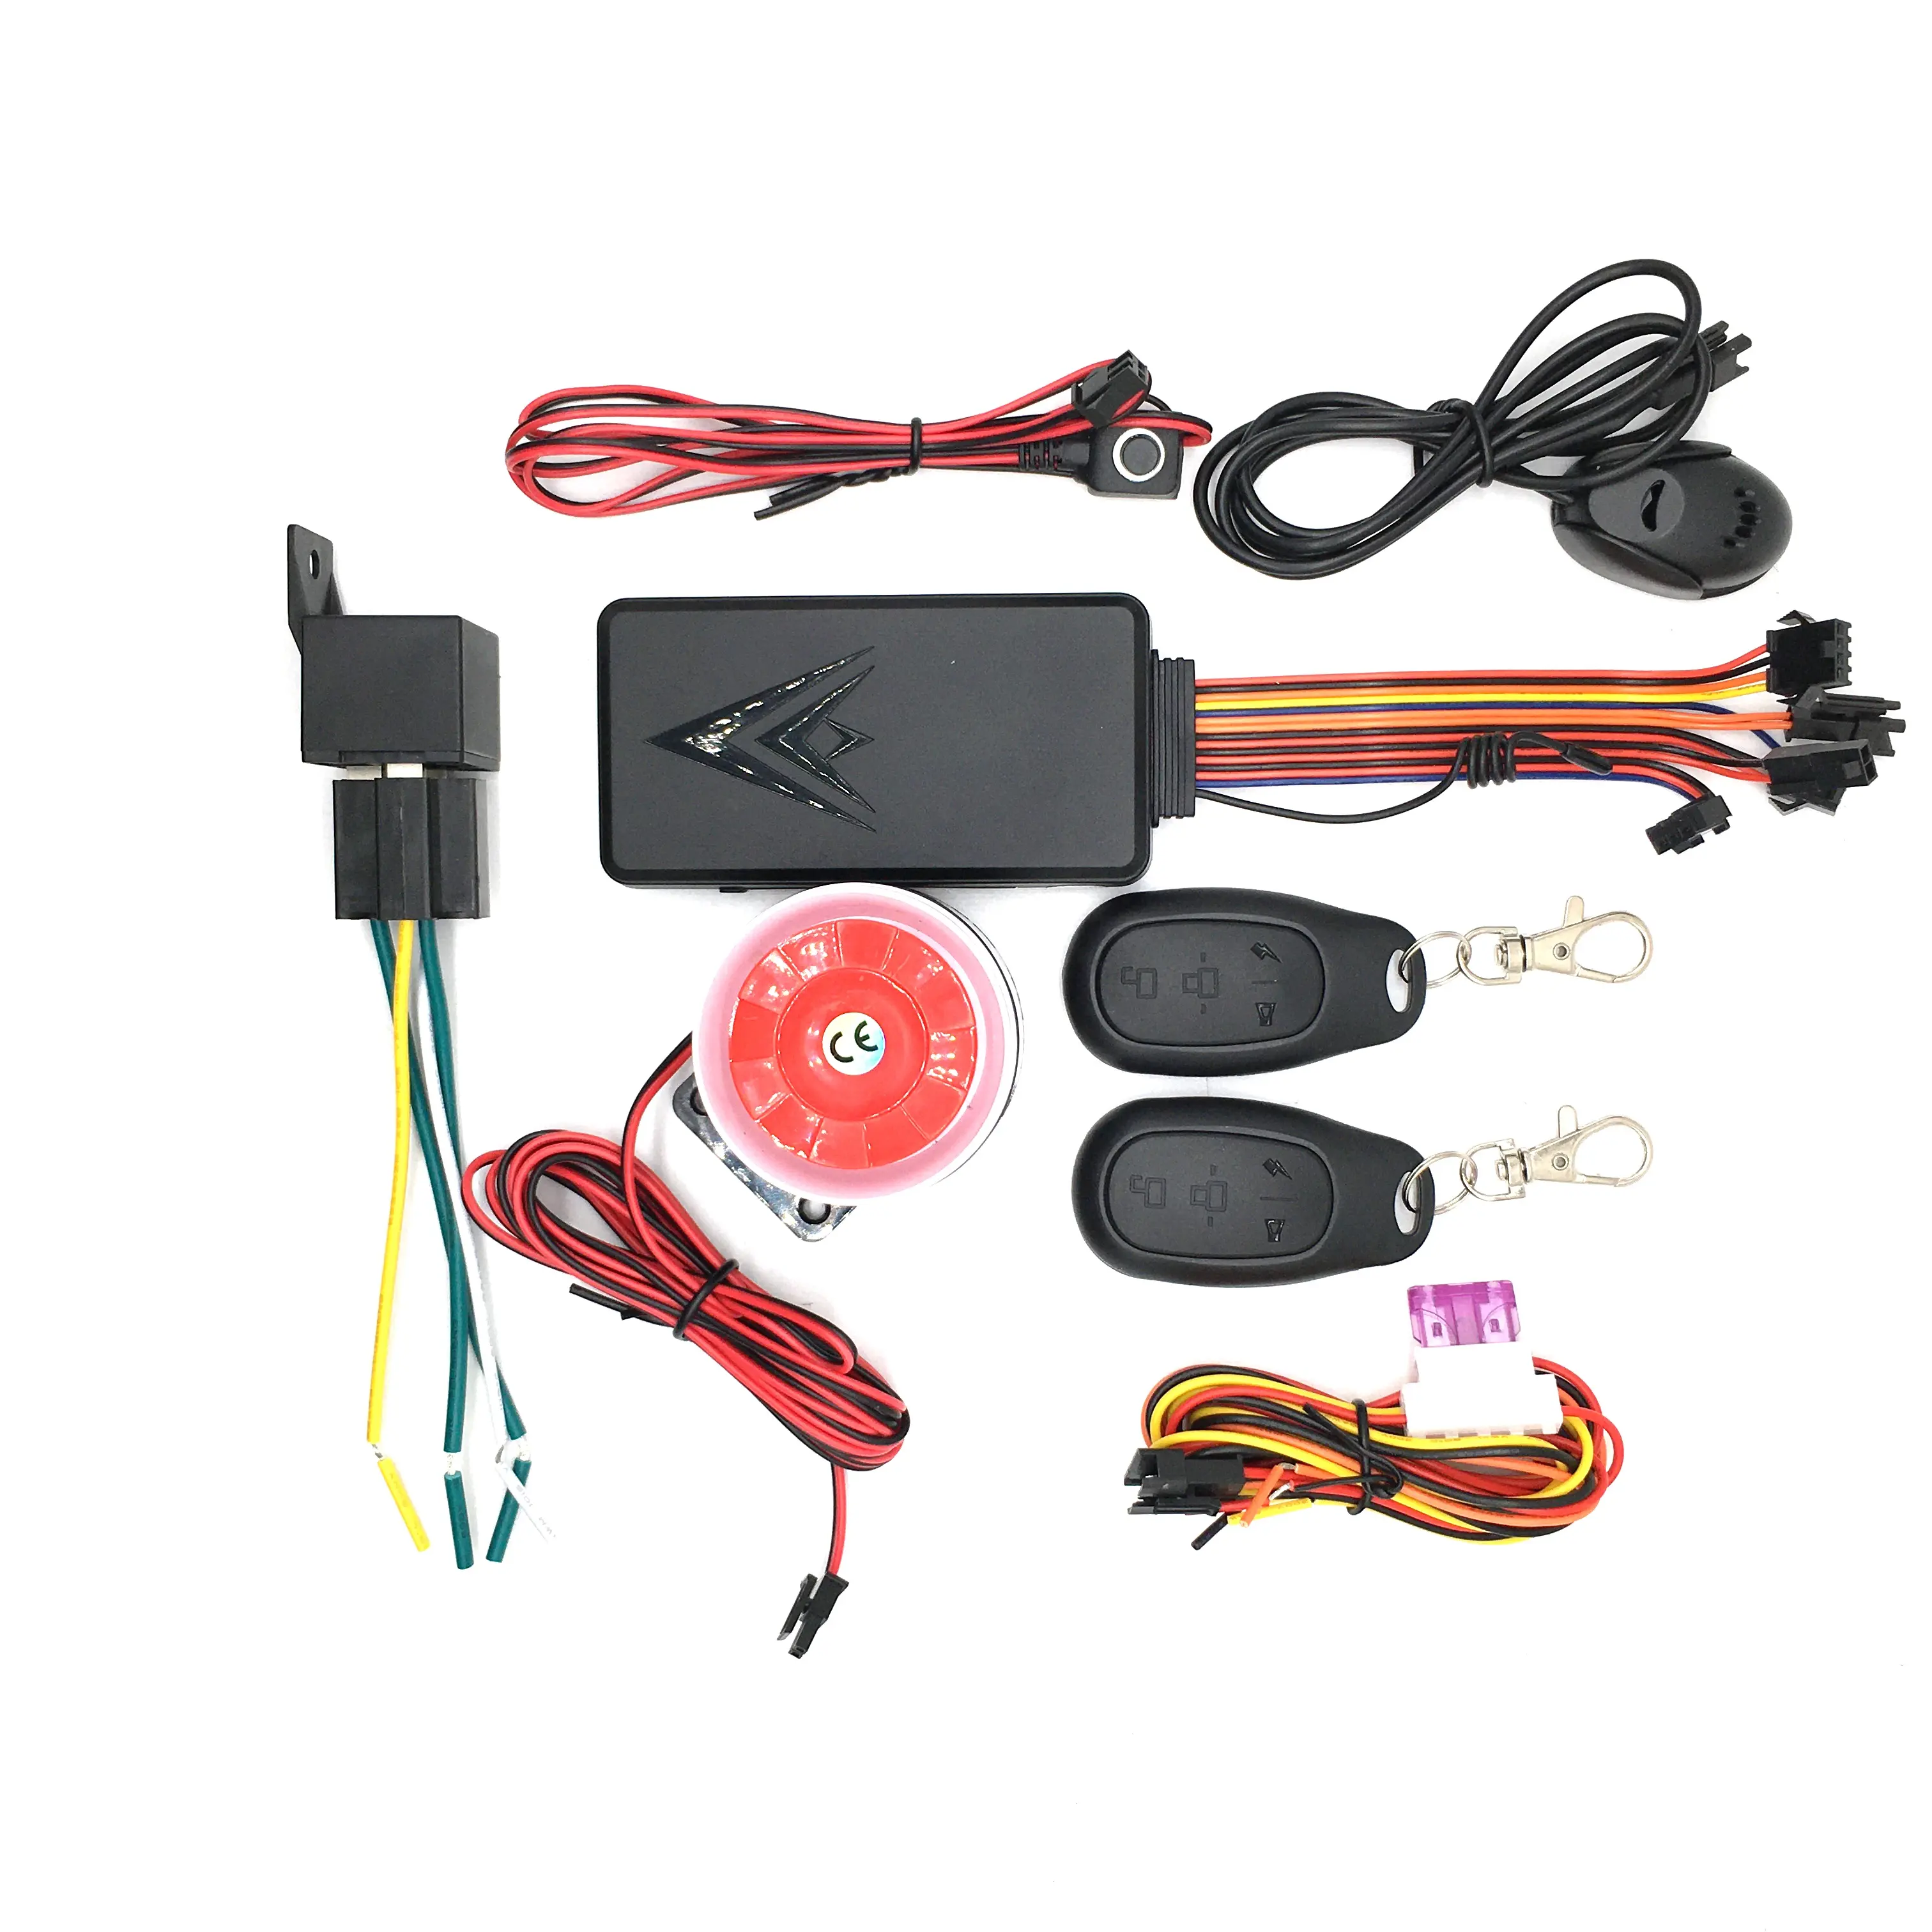 4G Wired Smart GPS Tracker Battery Real-Time Positioning Gps Tracking Device Car Track